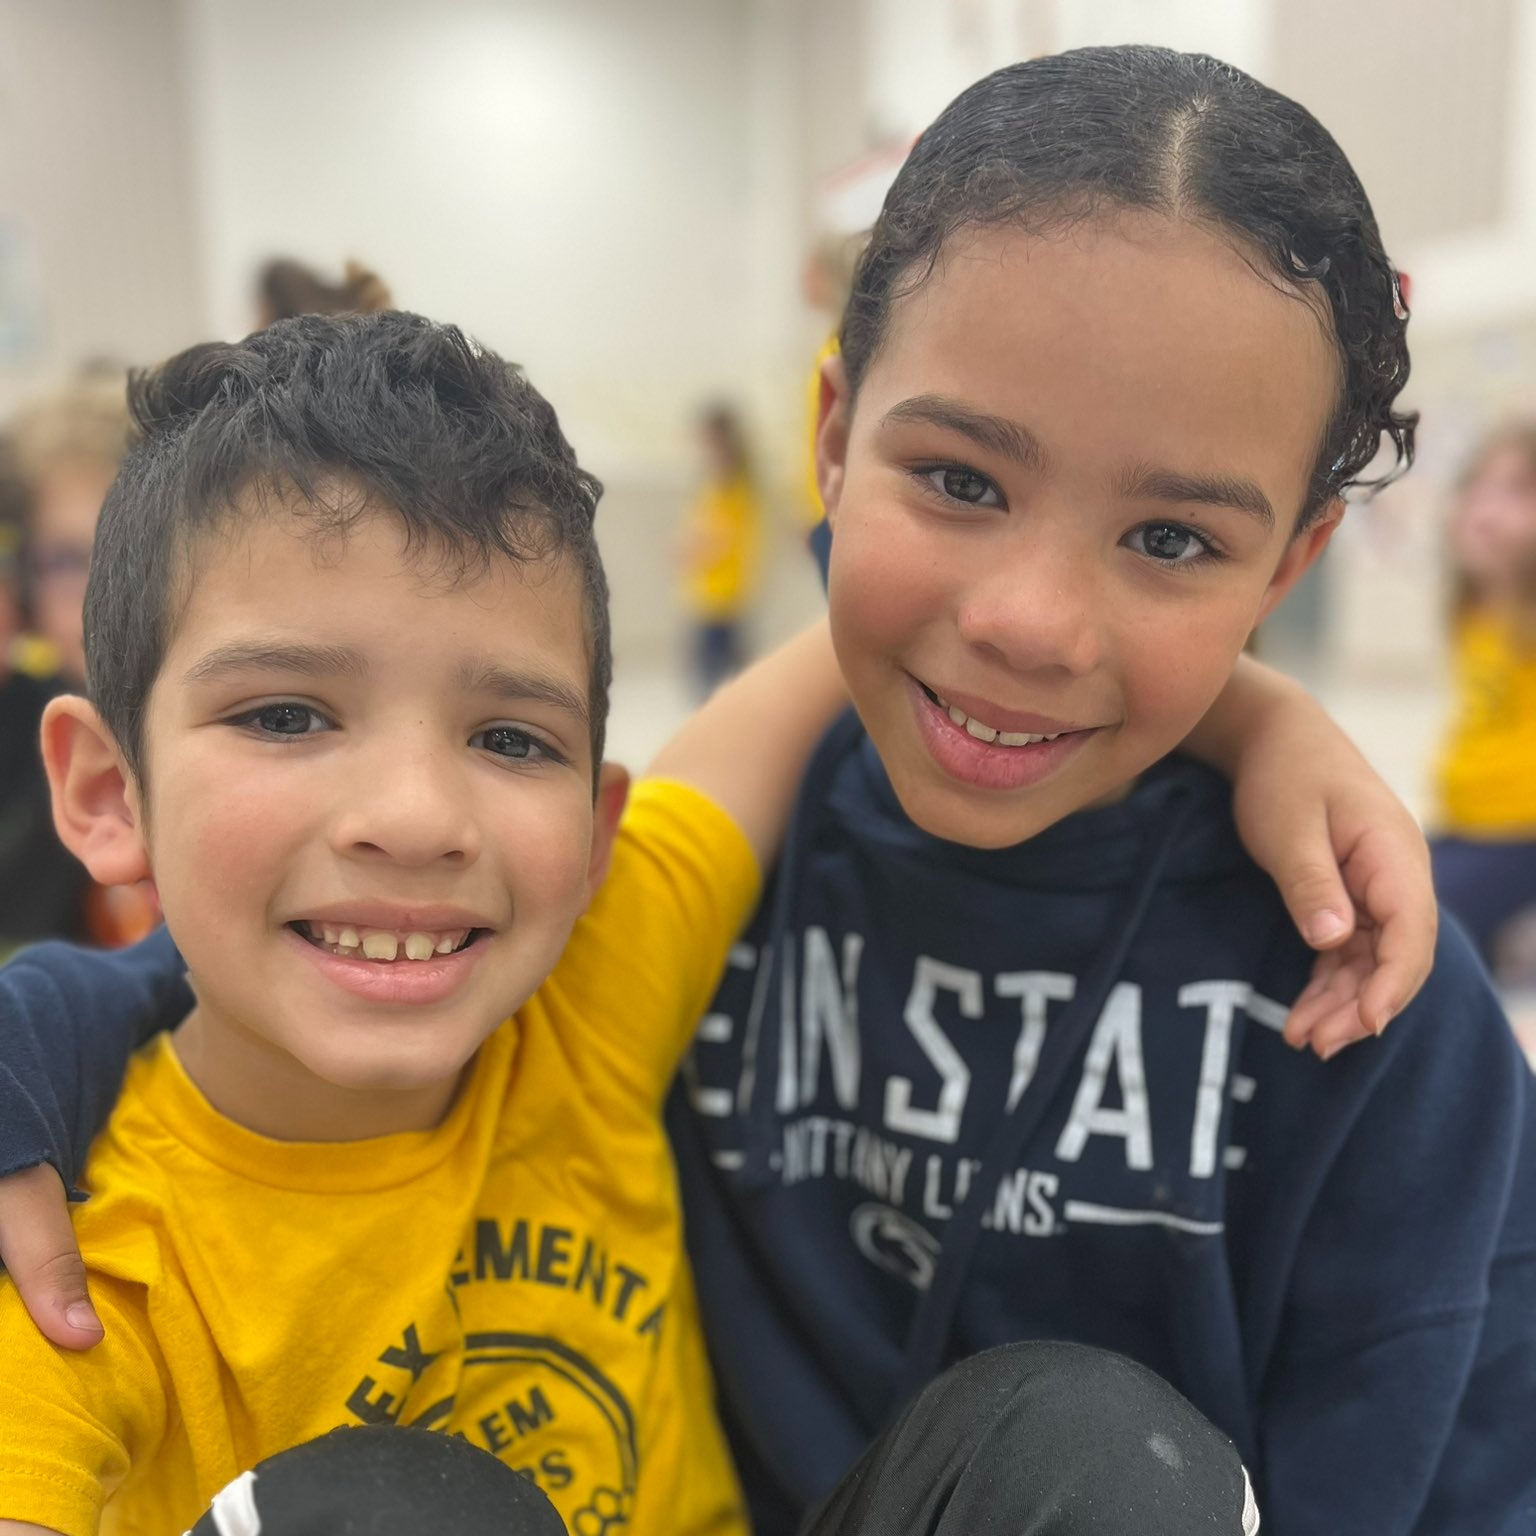 Young boy in yellow shirt and young girl in penn state sweatshirt.